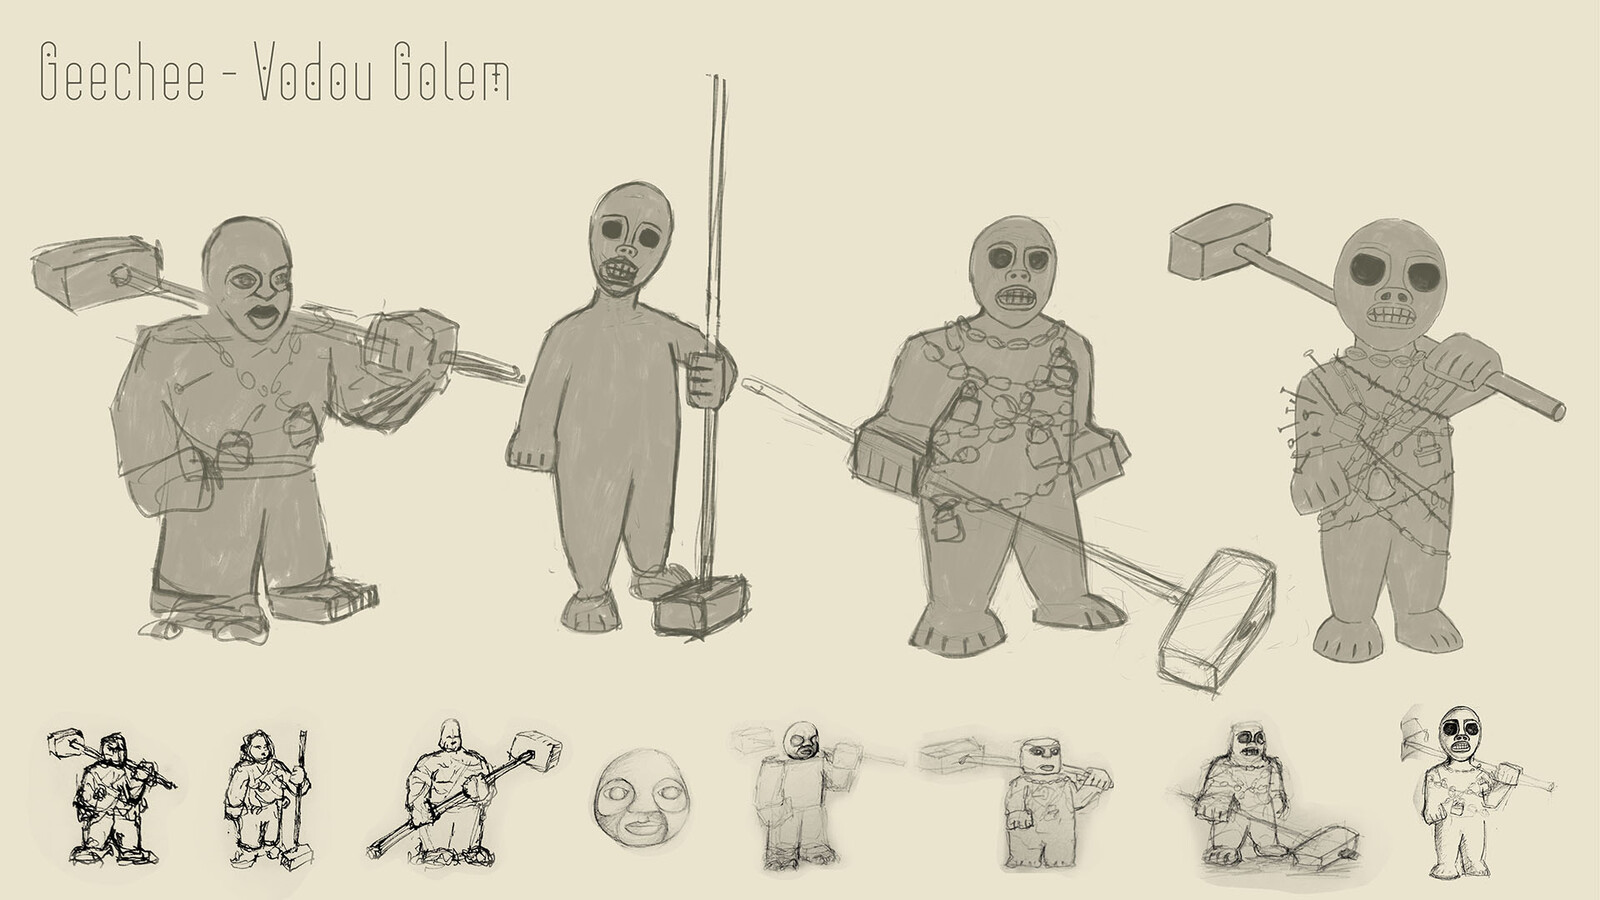 Geechee the Vodou Golem sketches and ideation.